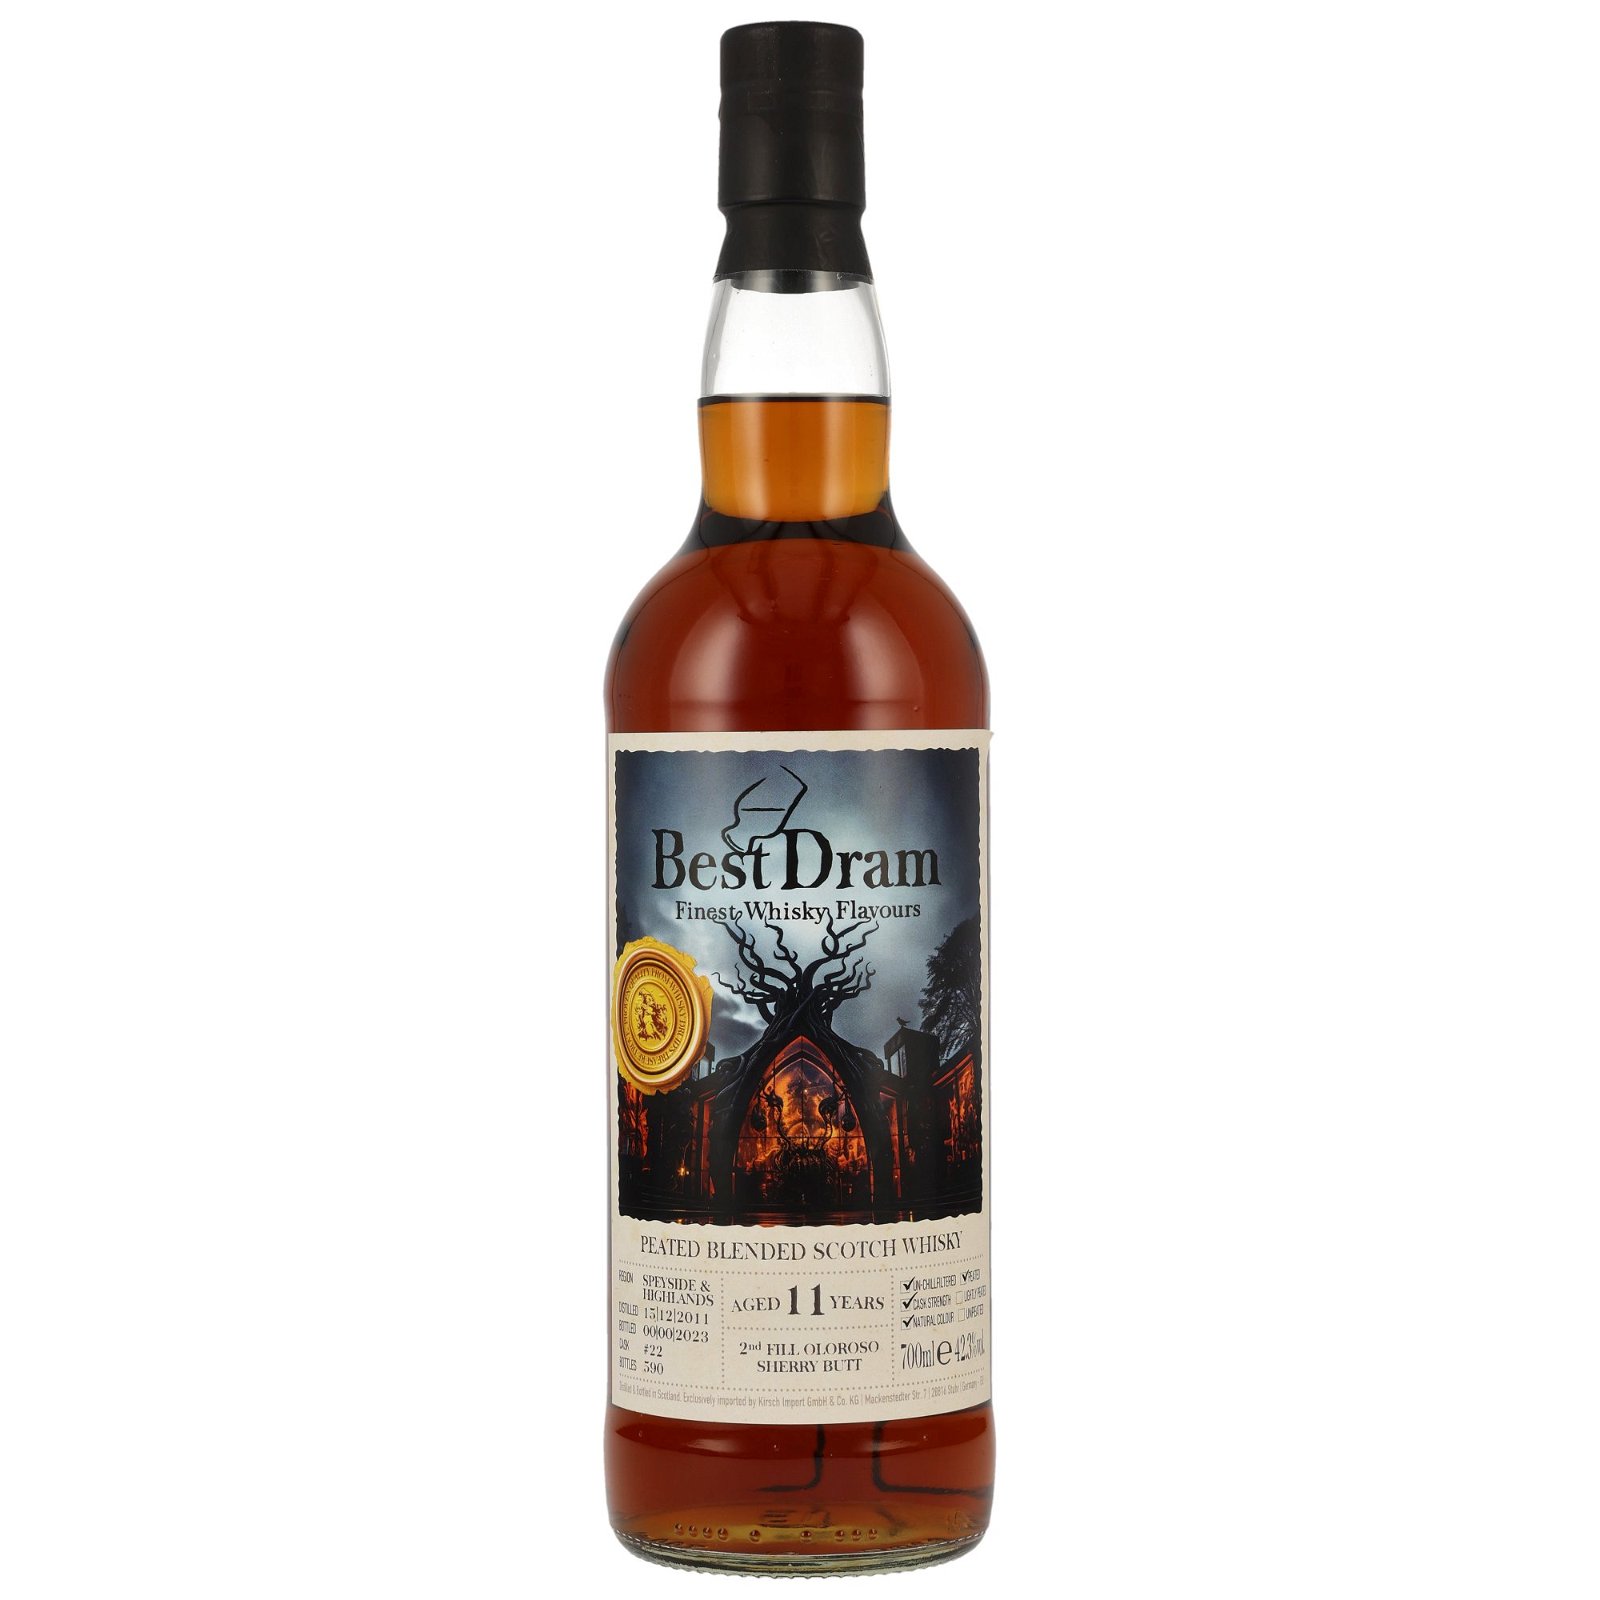 Peated Blended Scotch Whisky 2011/2023 - 11 Jahre Speyside & Highlands 2nd Fill Oloroso Sherry Butt No. 22 (Best Dram)